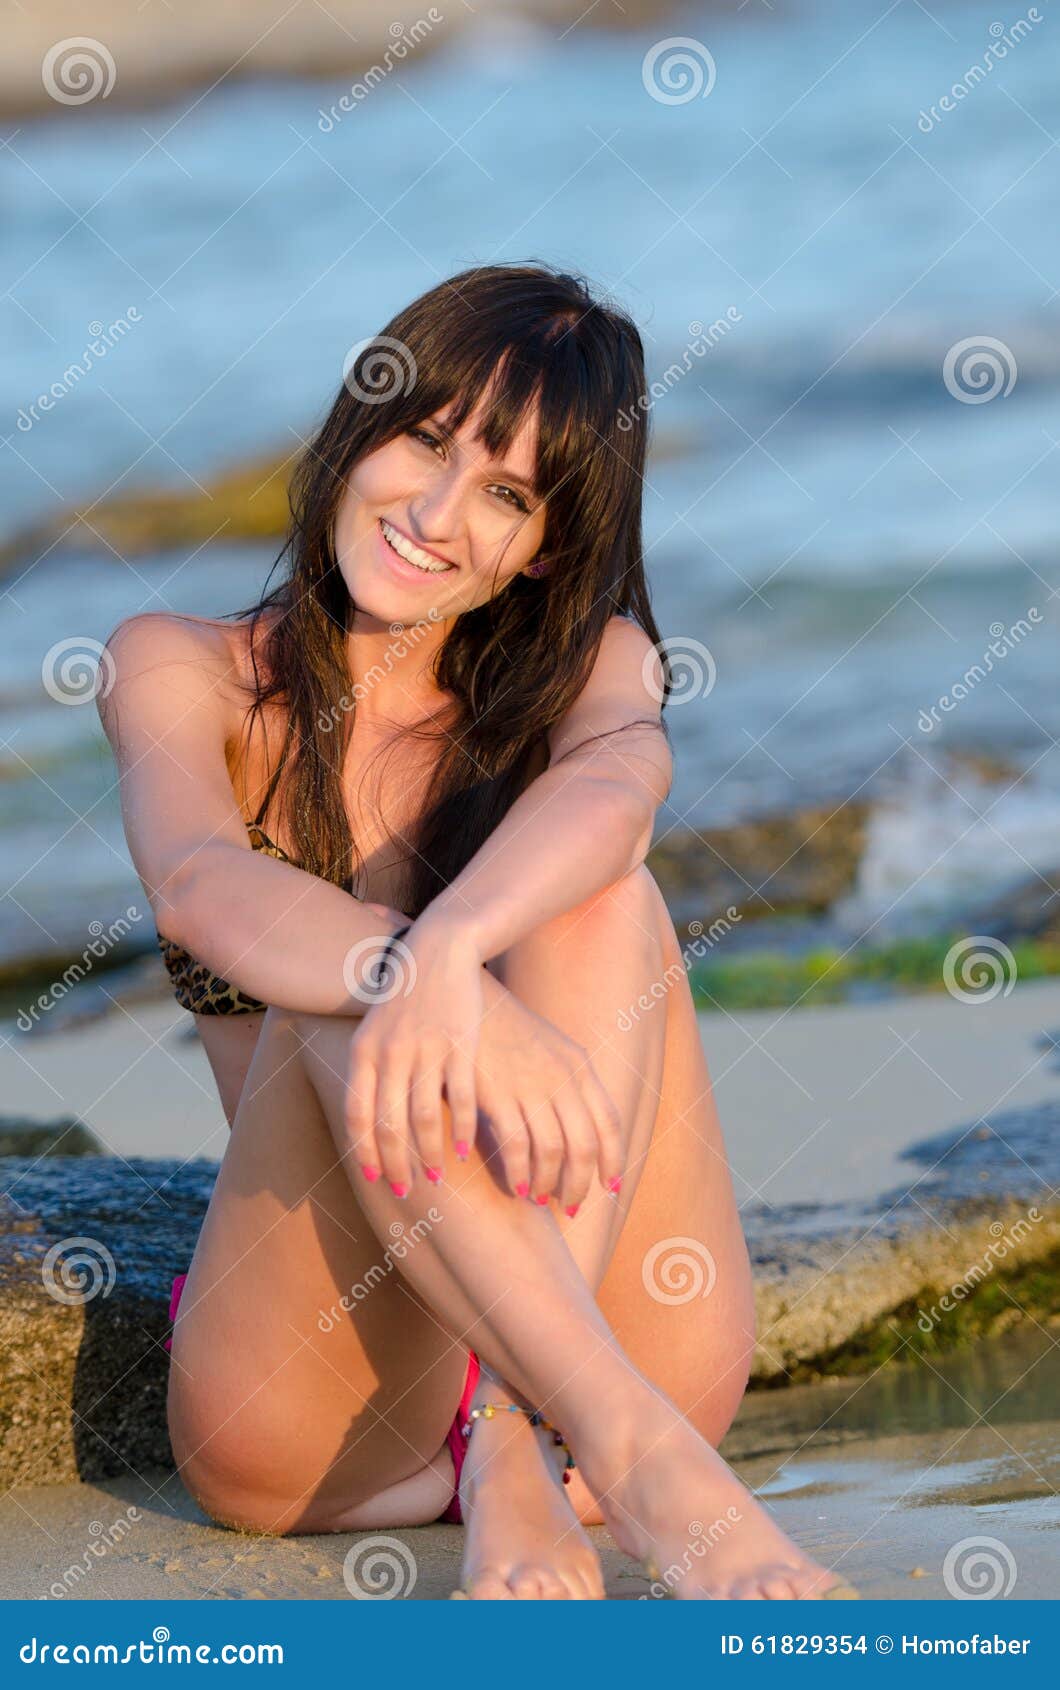 Lady Late Afternoon at the Beach with Bikini Stock Photo picture